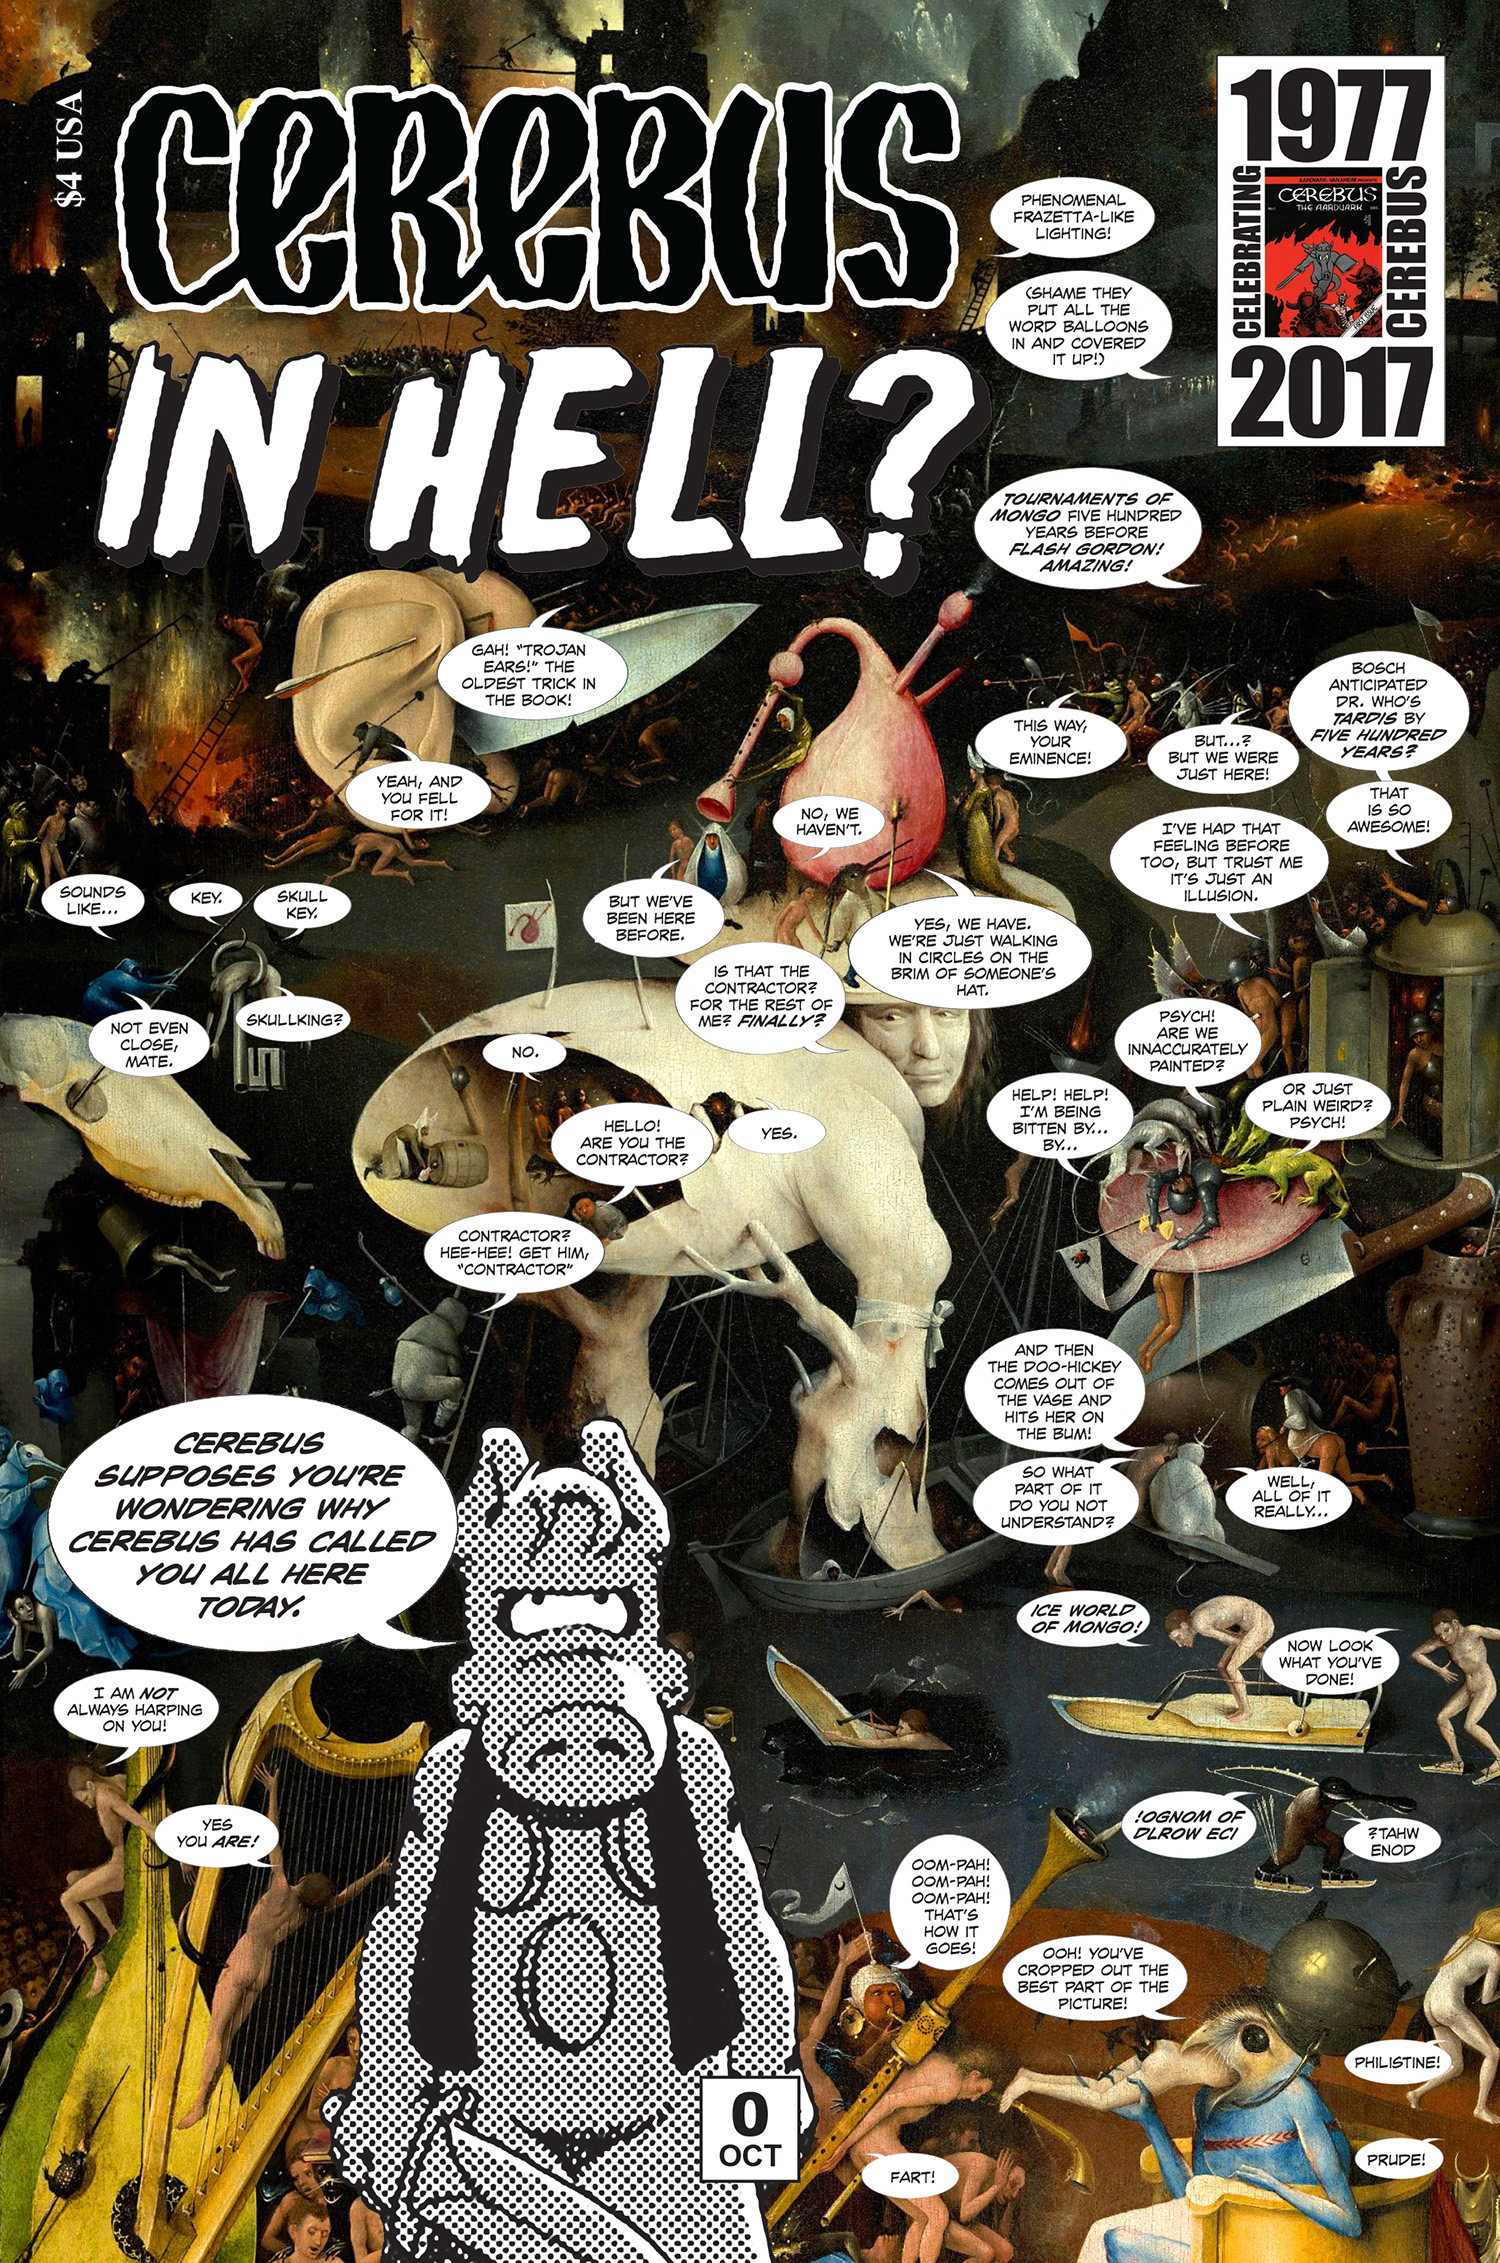 CEREBUS IN HELL #0